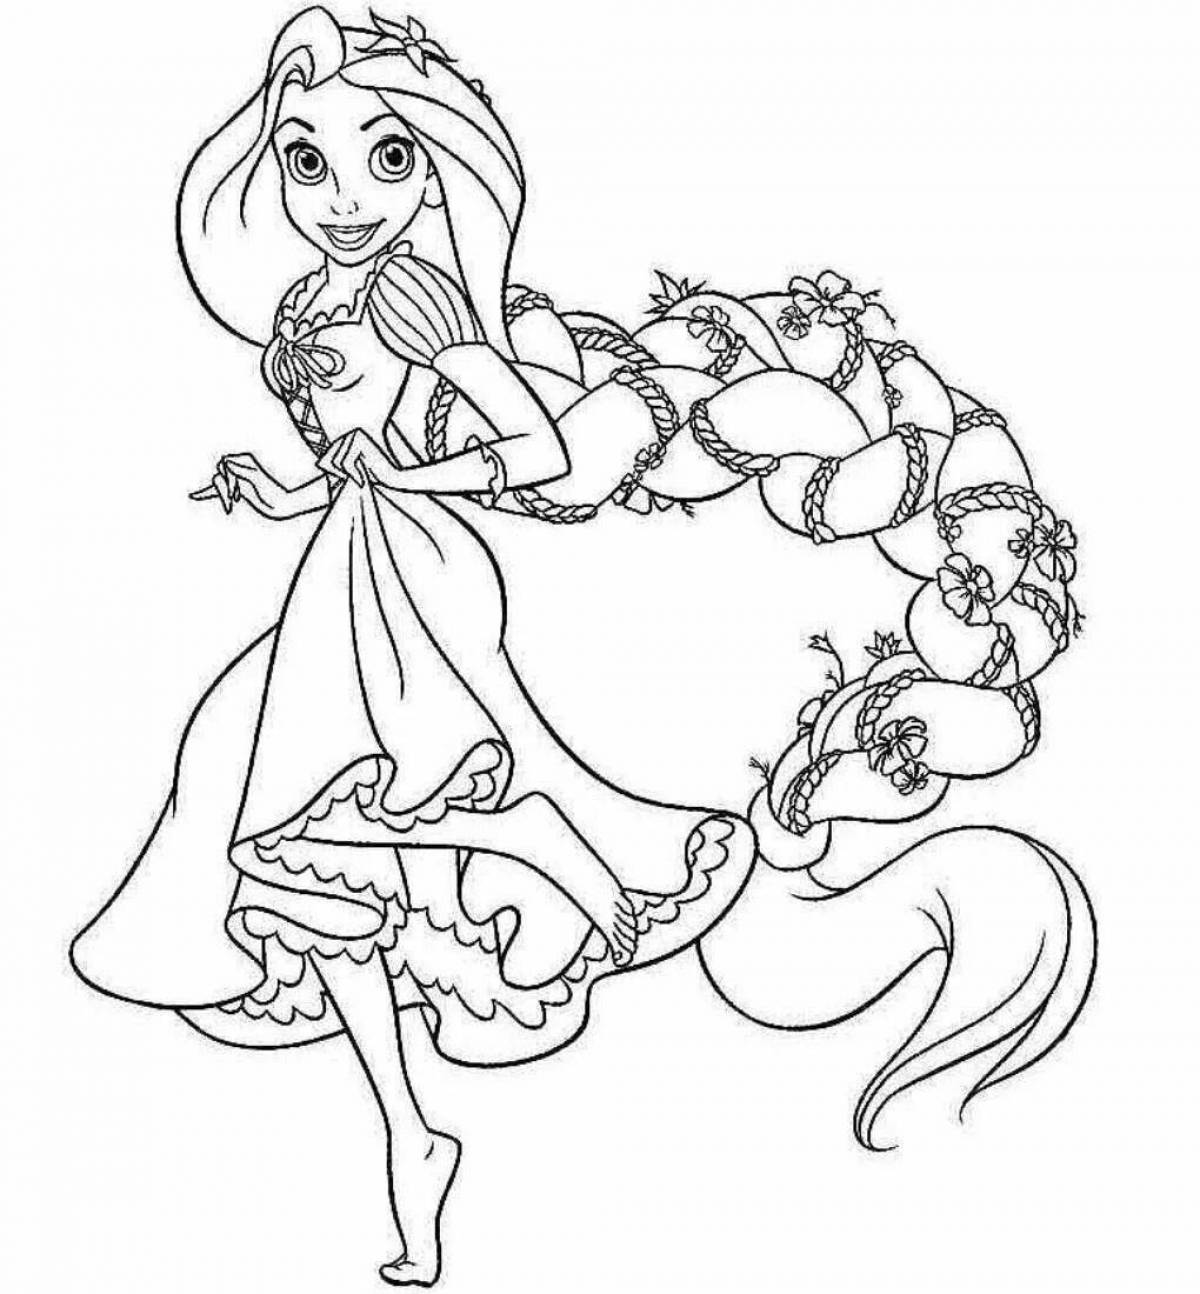 Exquisite coloring drawing of rapunzel